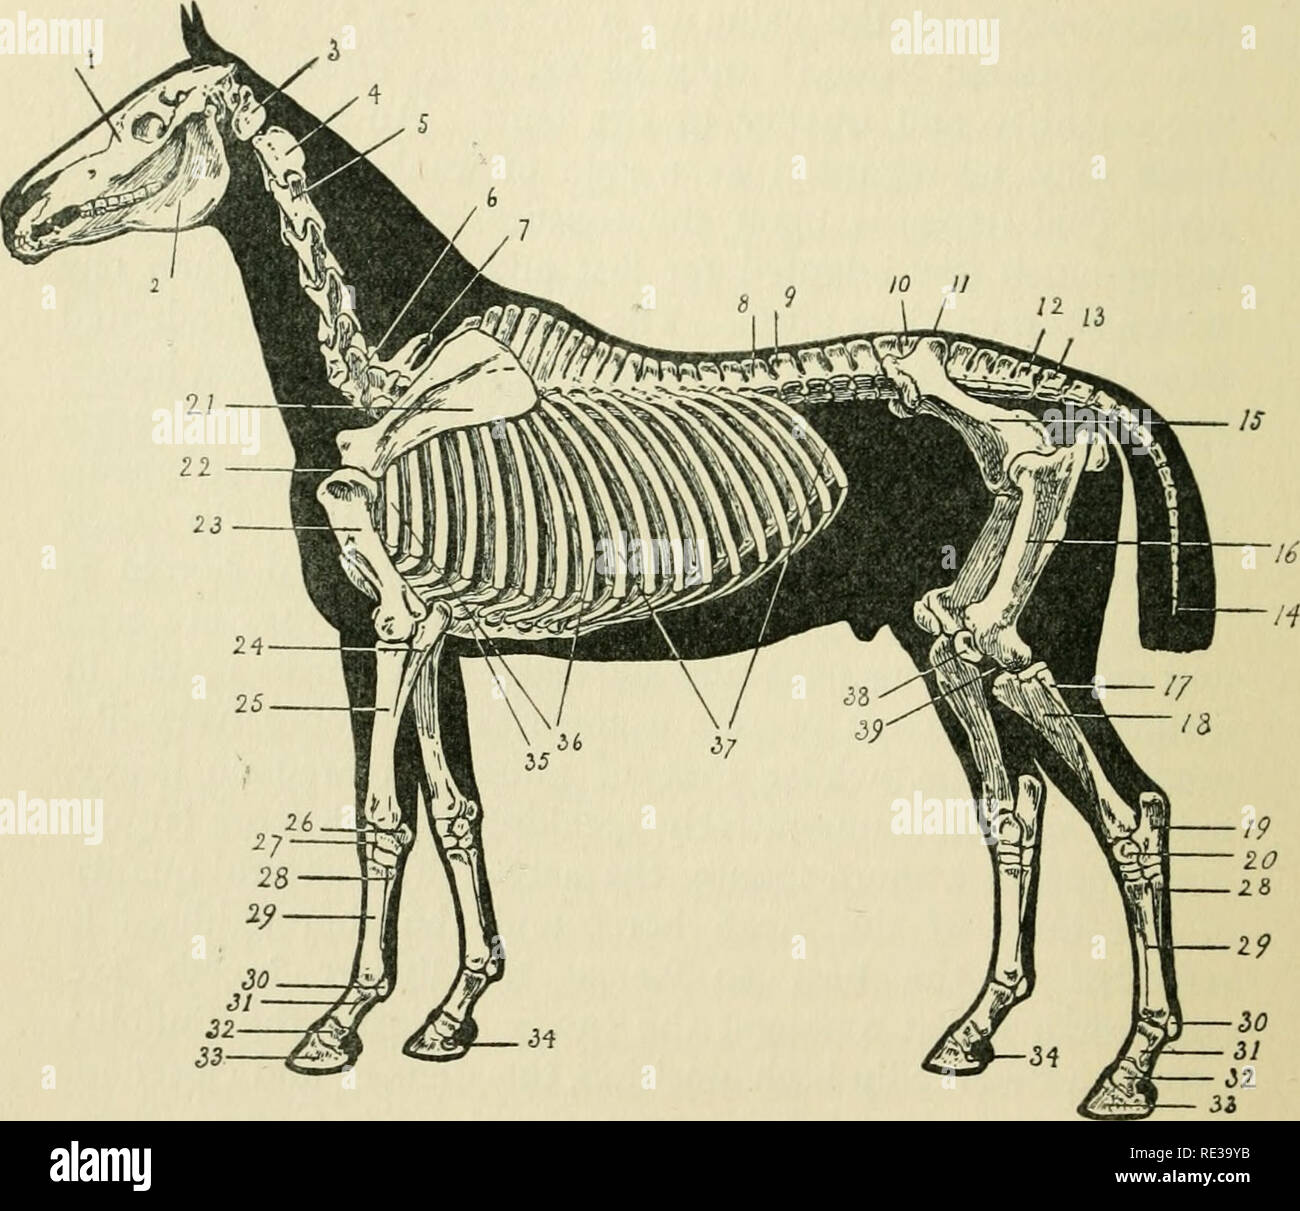 . The encyclopædia of the stable: a complete manual of the horse, its breeds, anatomy, physiology, diseases, breeding, breaking, training and management, with articles on harness, farriery, carriages, etc. comprising a thousand hints to horse owners. Horses. BONES. 1 Upper jaw. 2 Lower jaw. 3 Atlas. 4 Axis. I &gt; Cervical vertebrae. o &gt; Dorsal vertebras. &quot; &gt; Lumbar vertebras. lO J &quot;I 12/ Sacrum. ^3 . Caudal vertebras. 14 ) 15 Pelvis. 16 Femur or thigh. 17 Fibula. 18 Tibia. 19 Os Calais or point of hock. 20 Astragalus. 21 Scapula. 22 Shoulder joint. 23 Humerus. 24 Ulna. 25 Rad Stock Photo